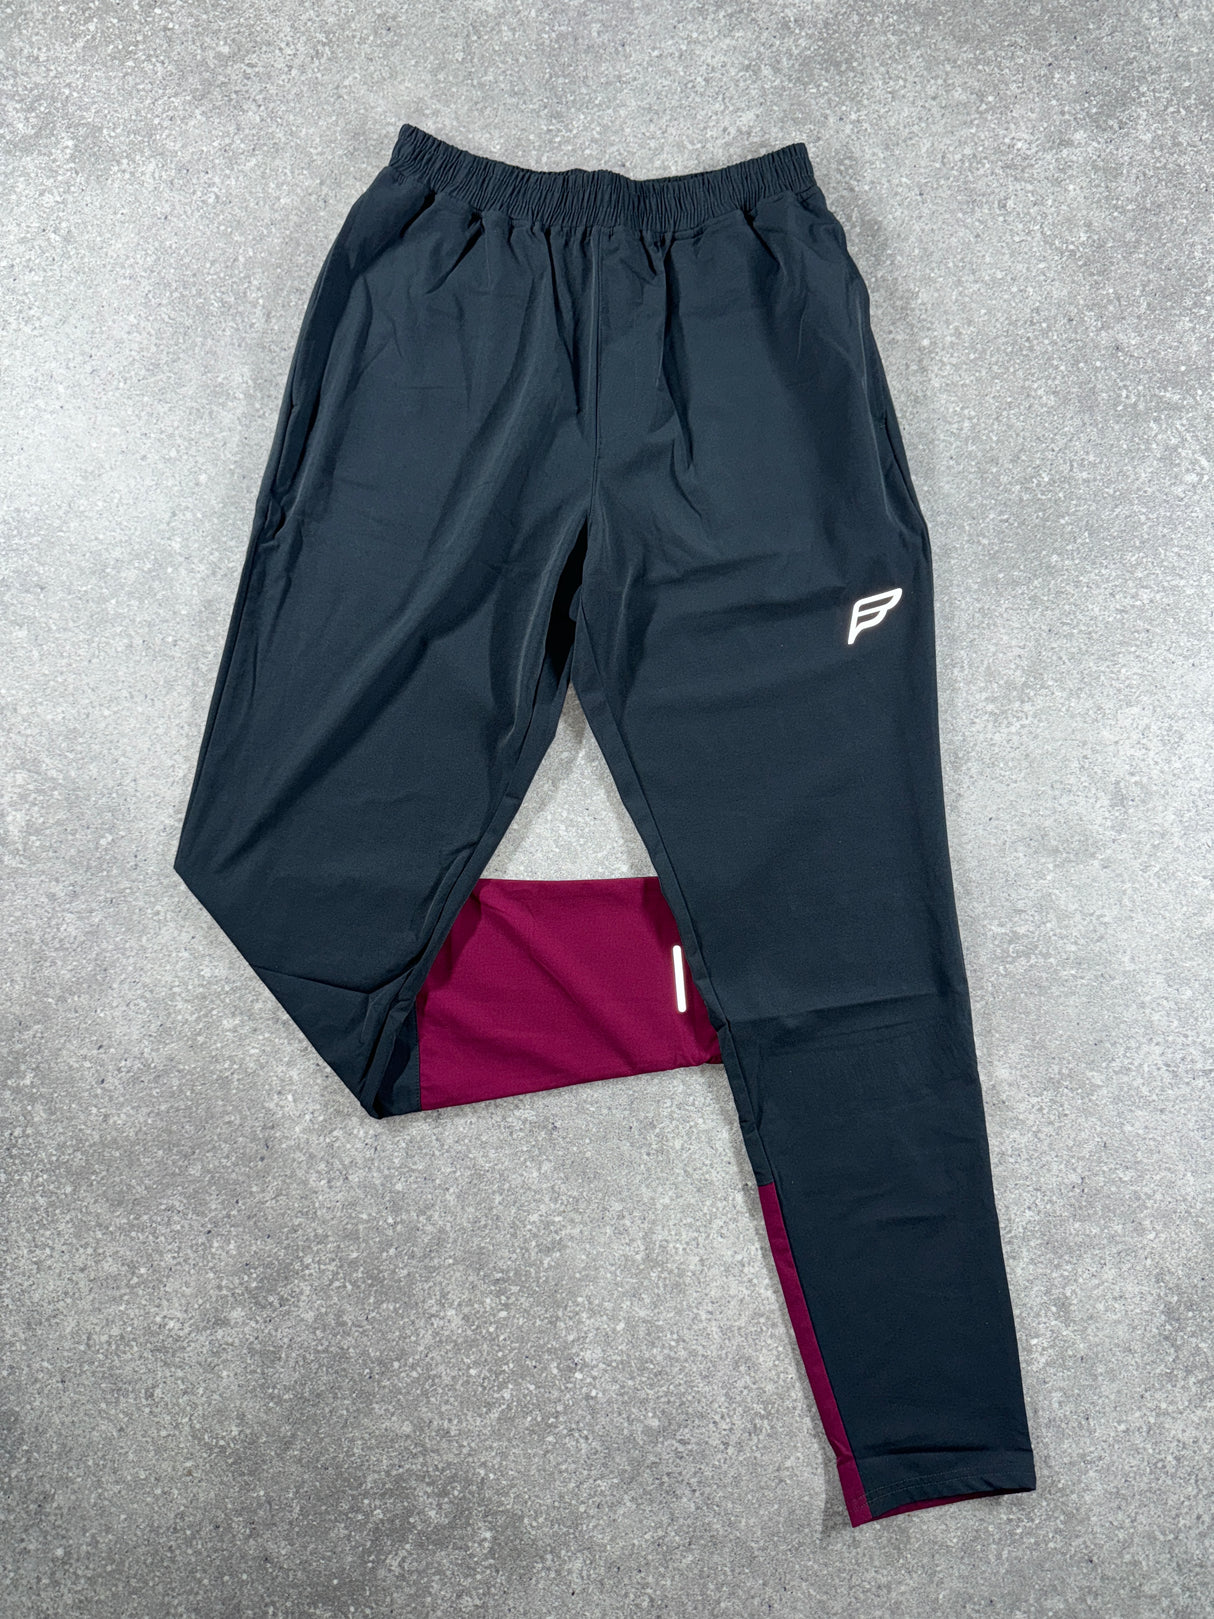 Frequency - Thrive Pants - Carbon Grey